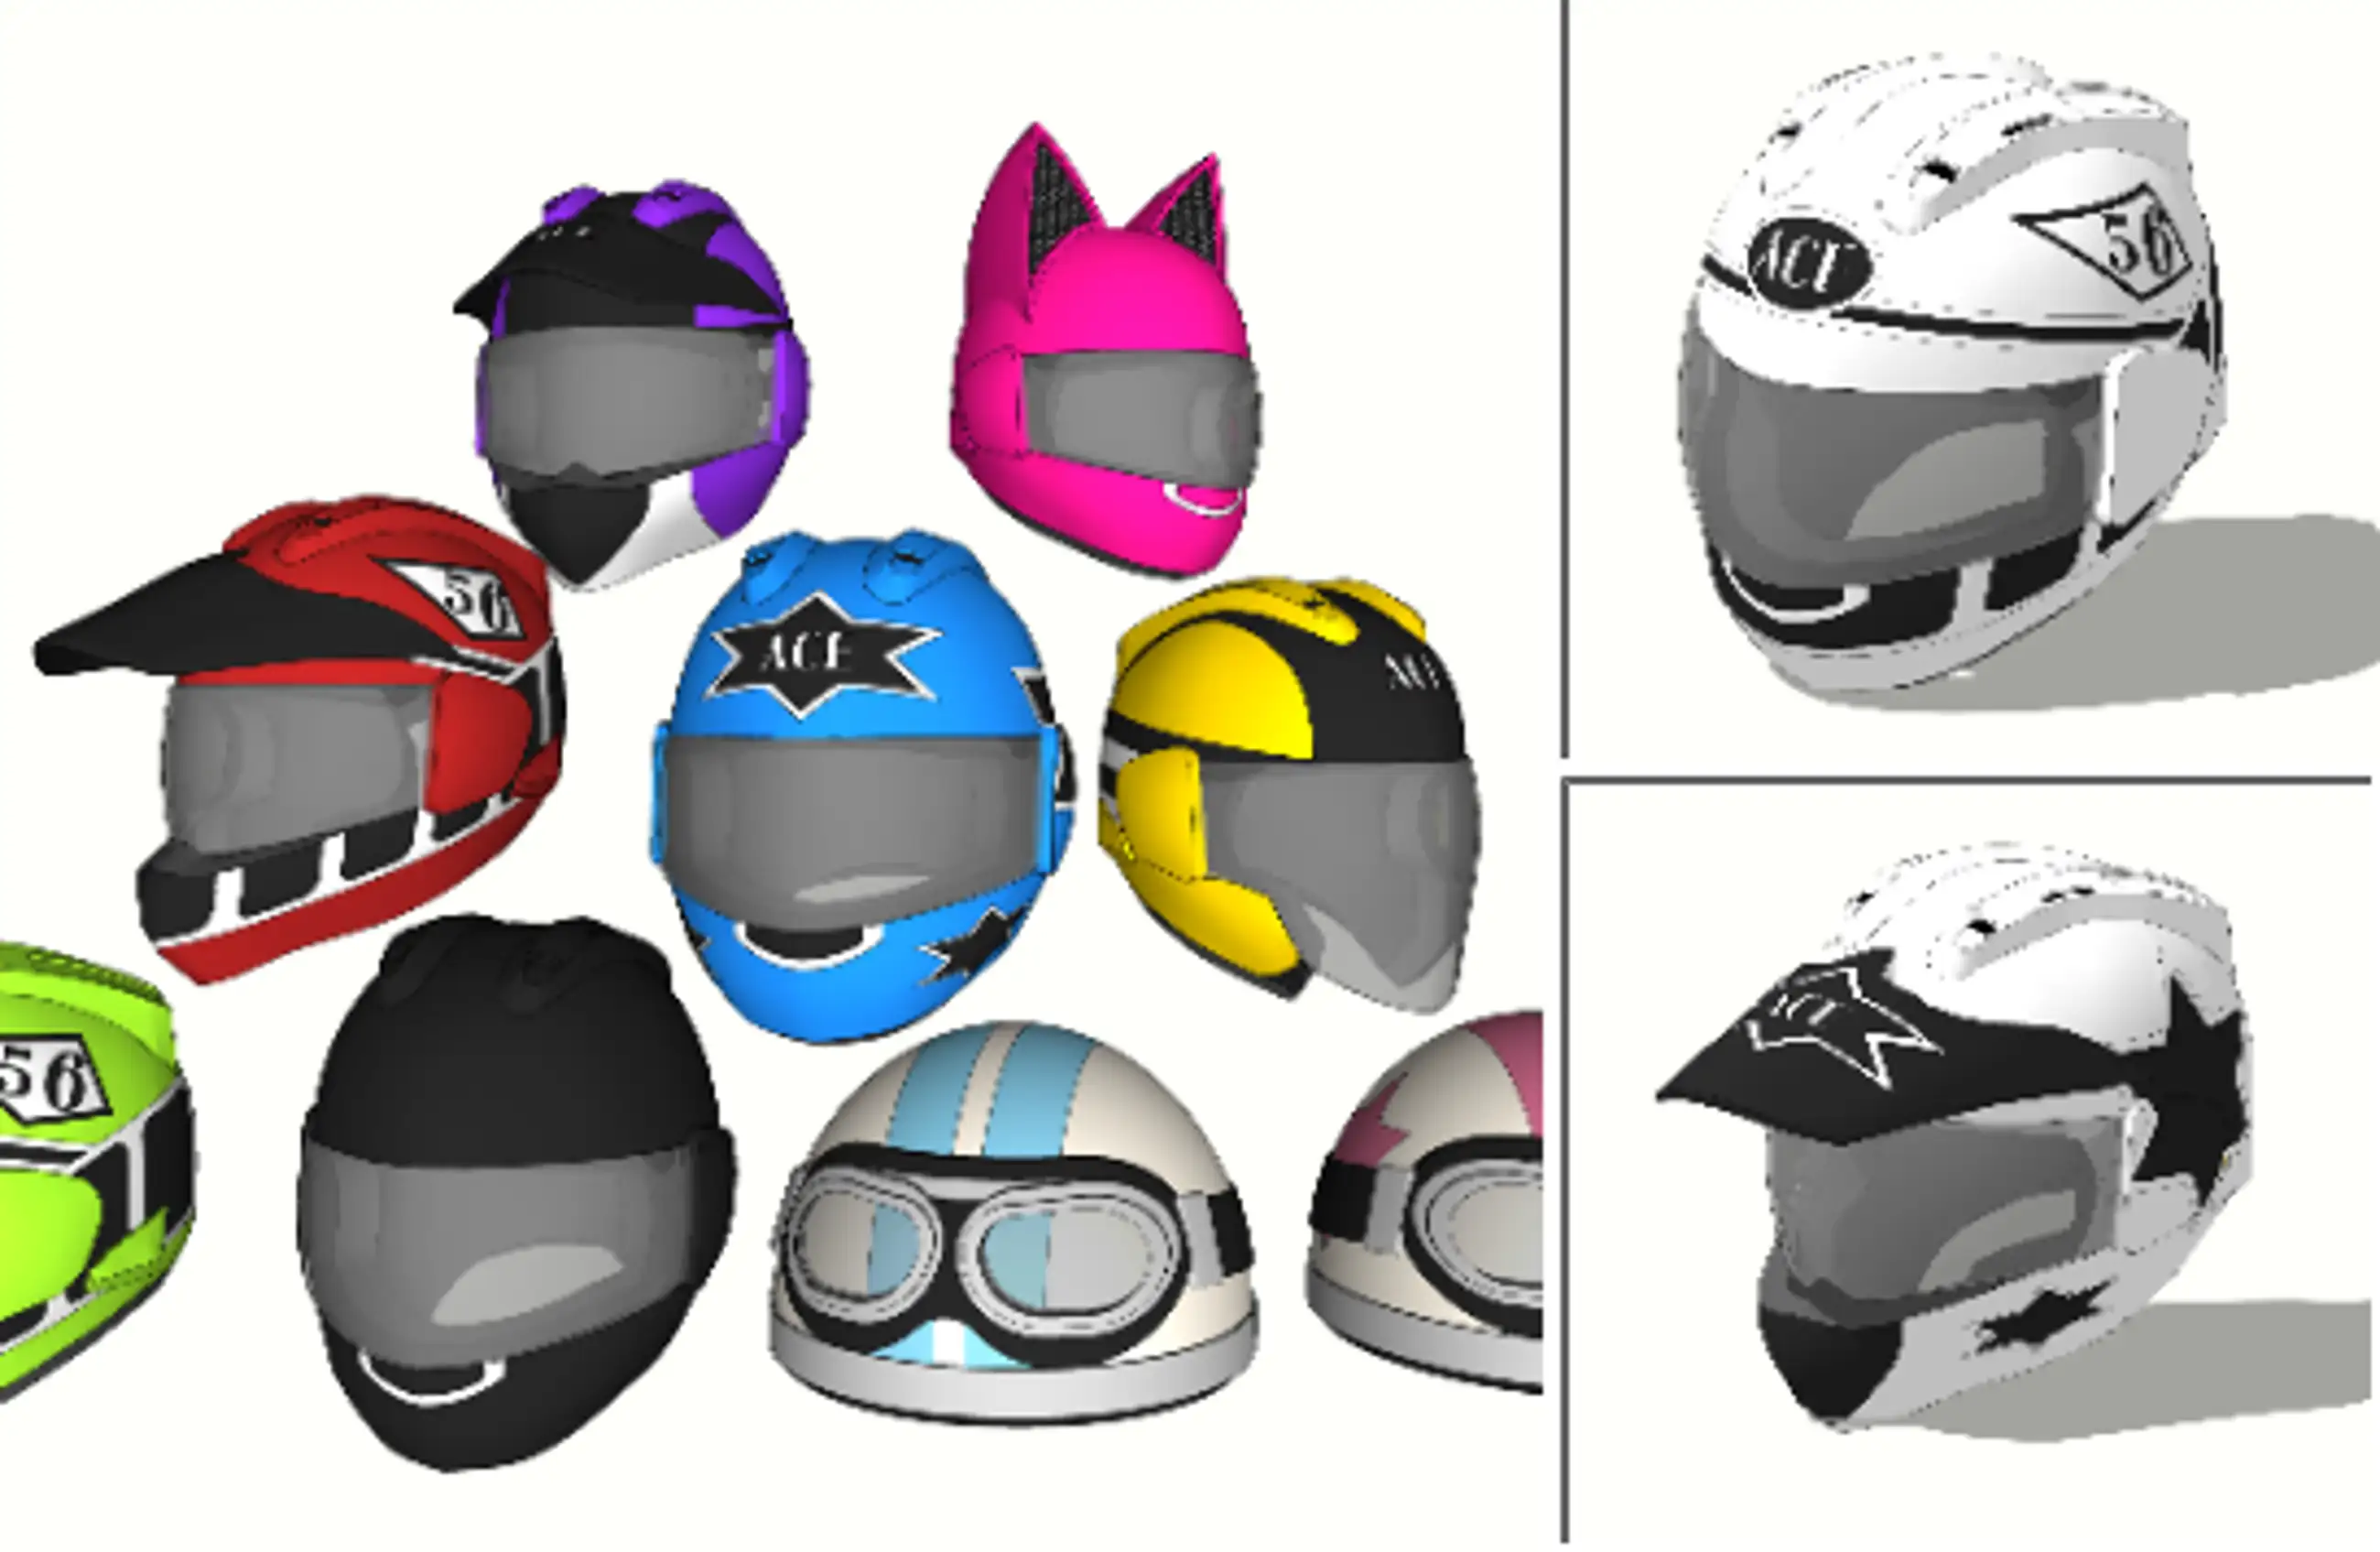 5 collection of motorcycle helmets (full face, half face, off-road, semi-mo, cat ears)